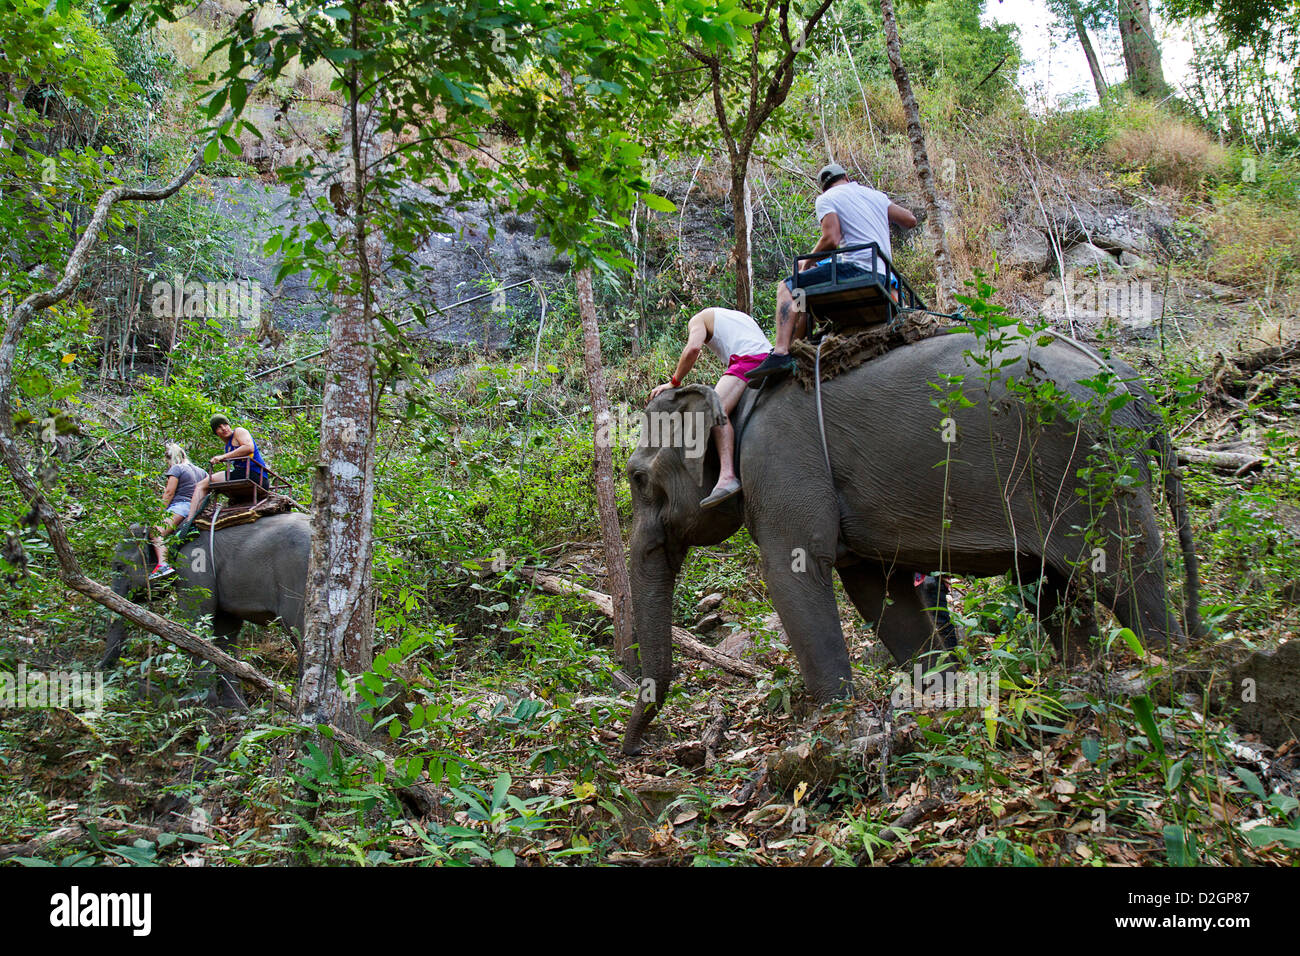 Elephant carrying tourists on a mountain Stock Photo